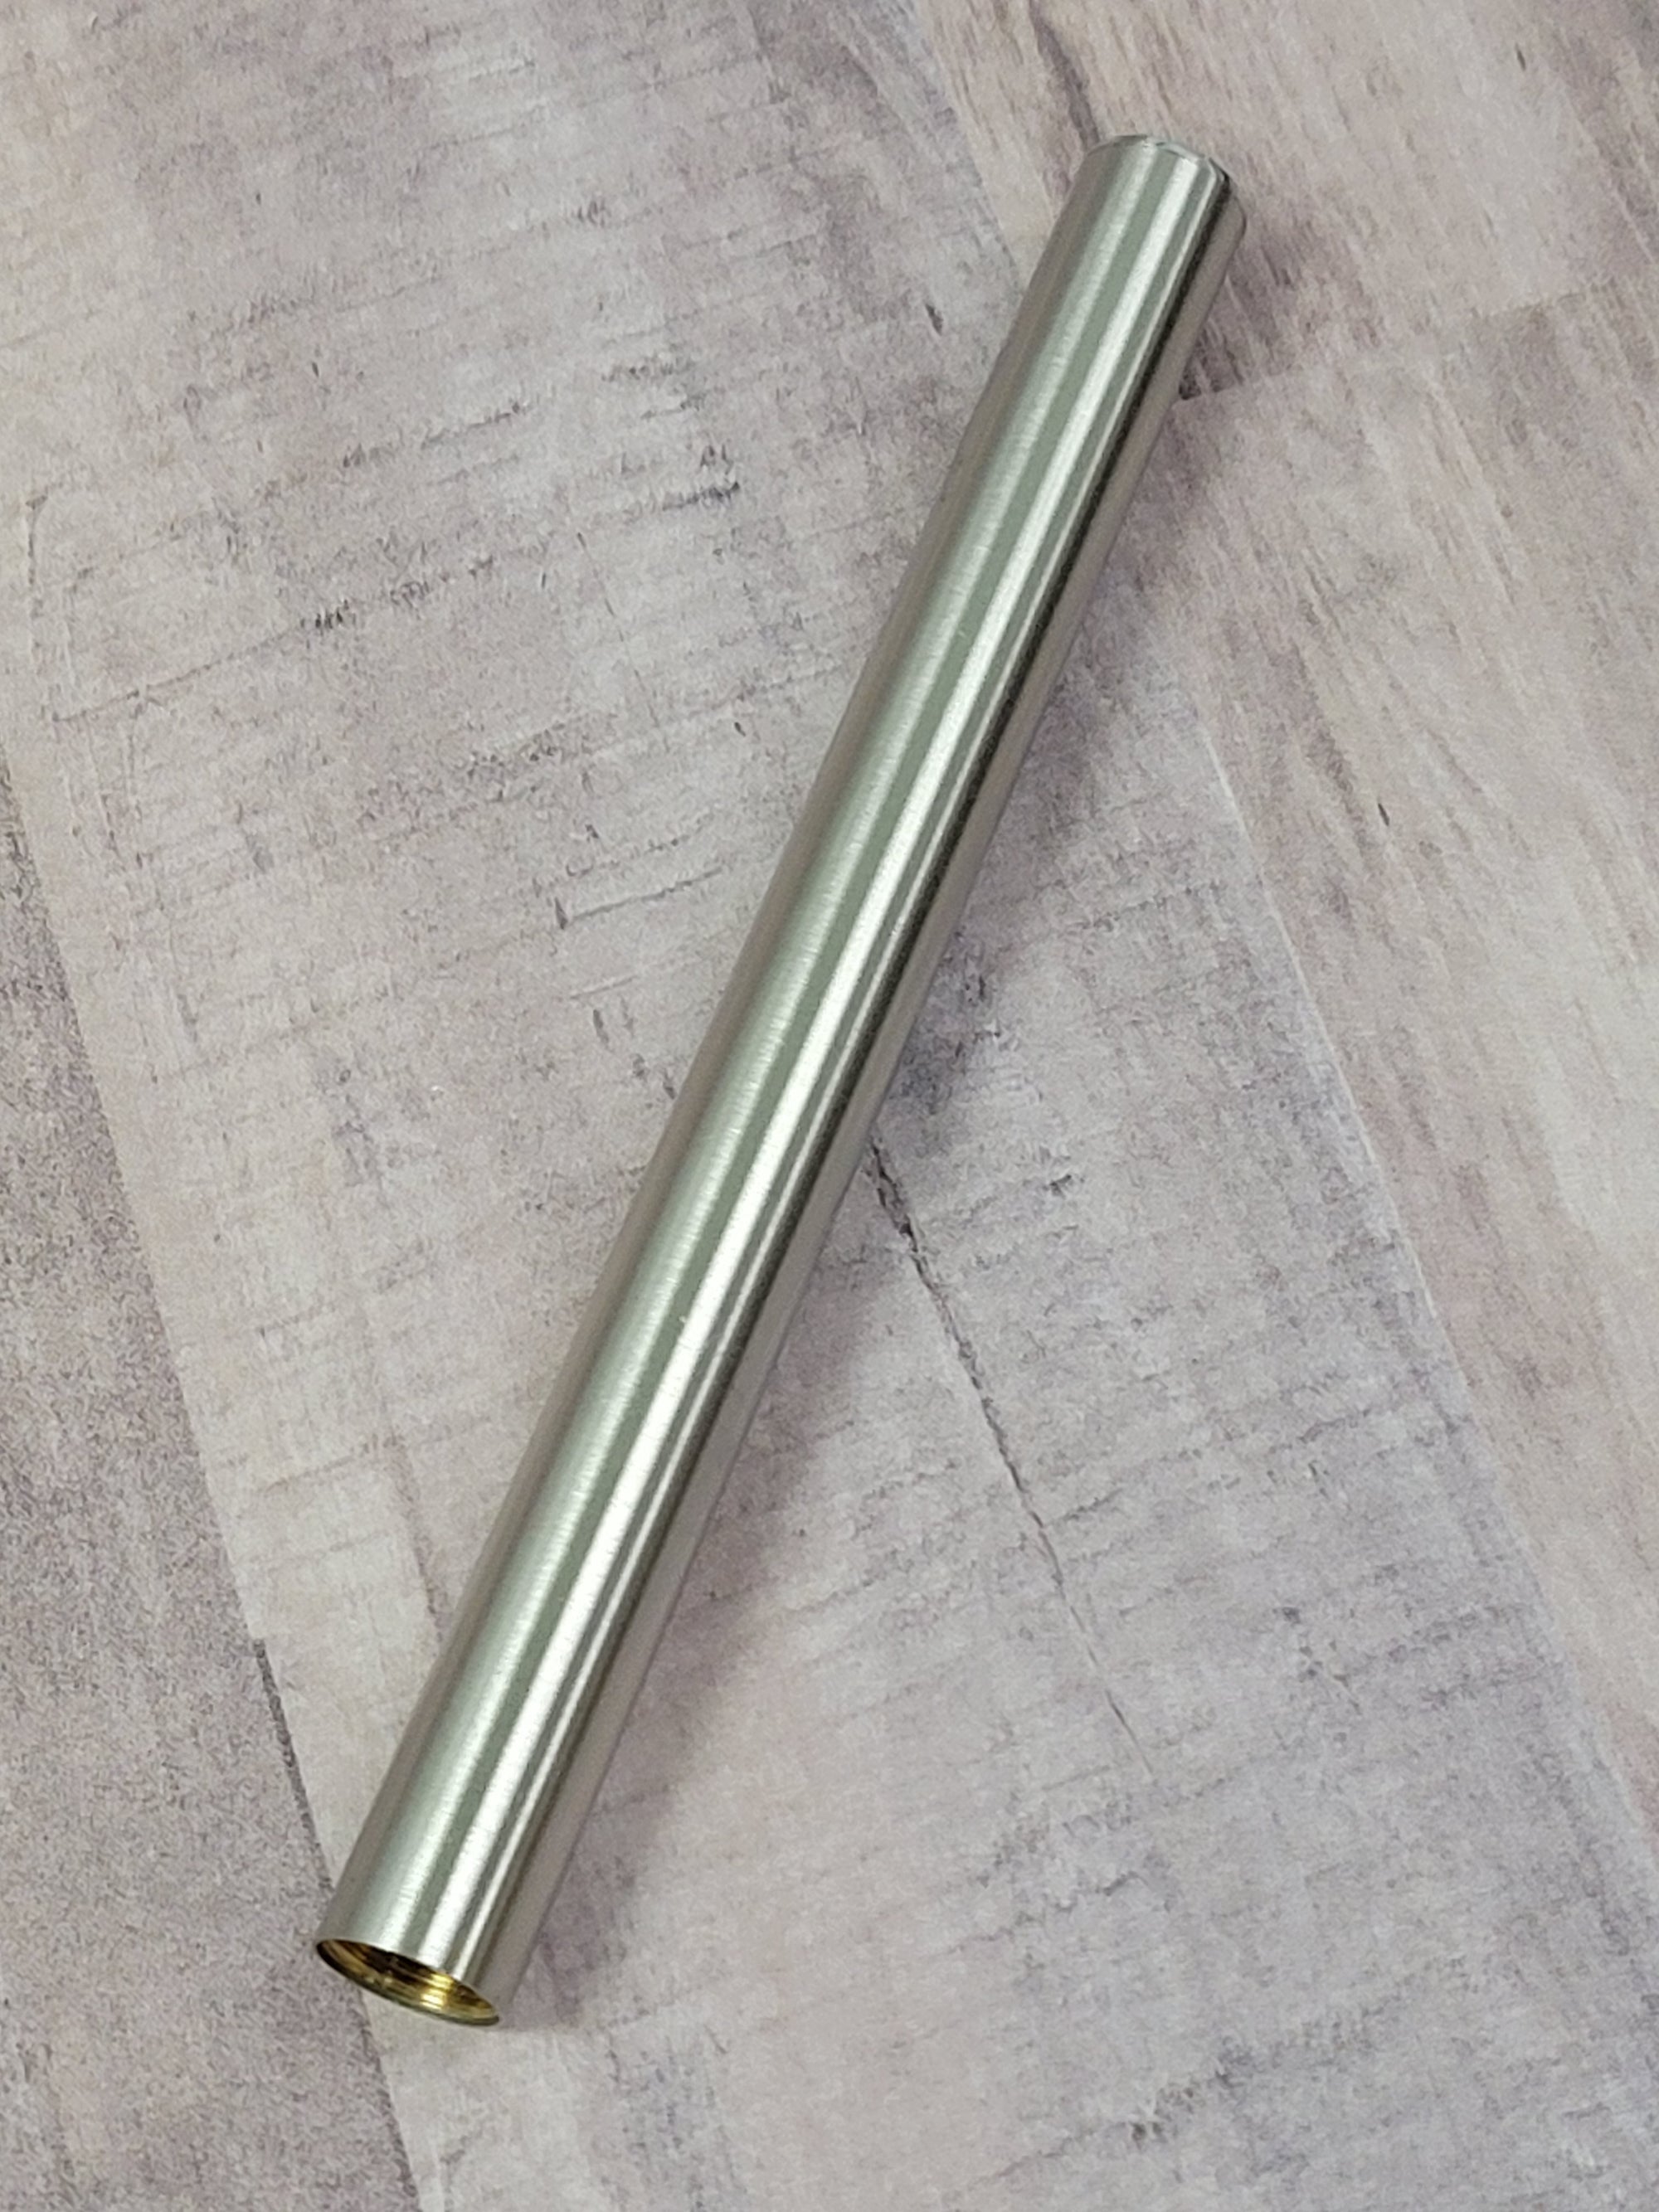 STAINLESS STEEL PEN FOR CRAFTING